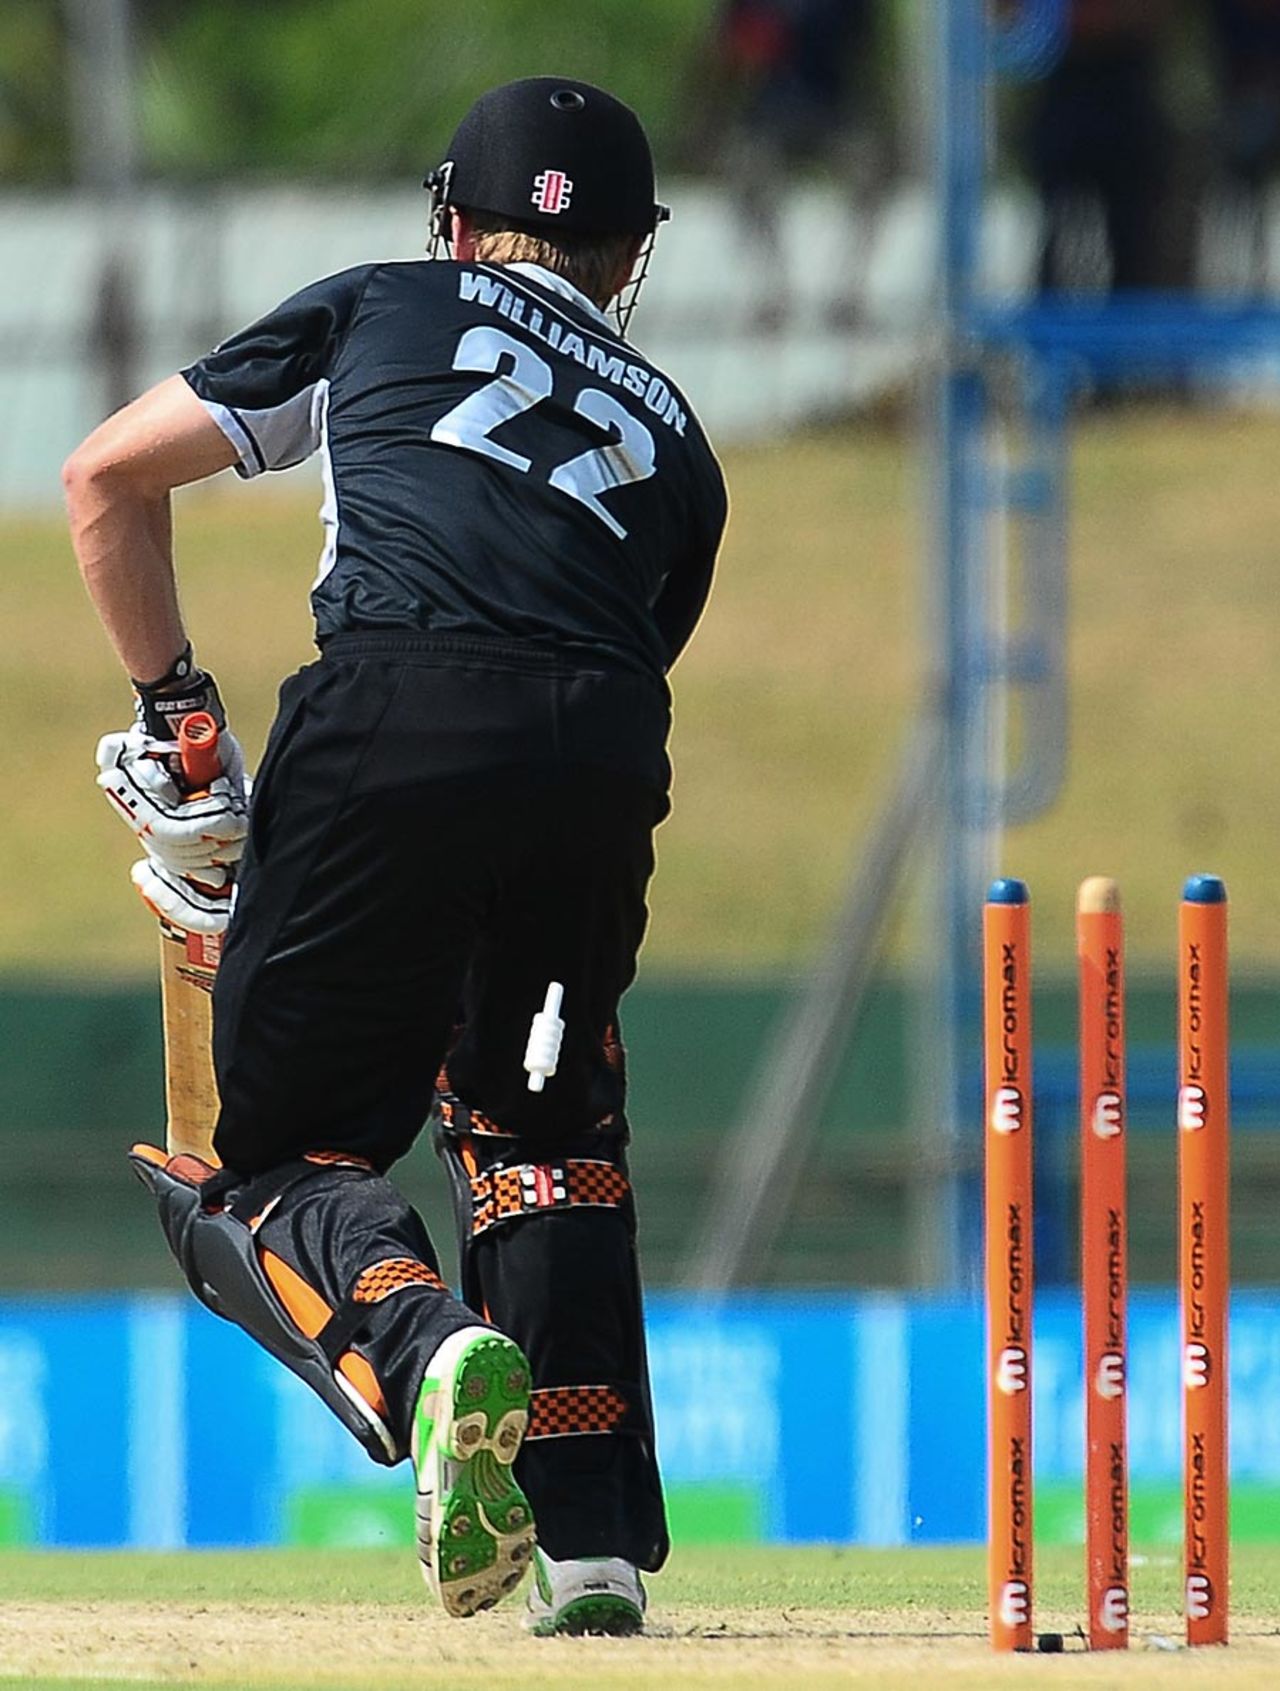 Not the greatest of debuts for Kane Williamson, India v New Zealand, tri-series, 1st ODI, August 10, 2010